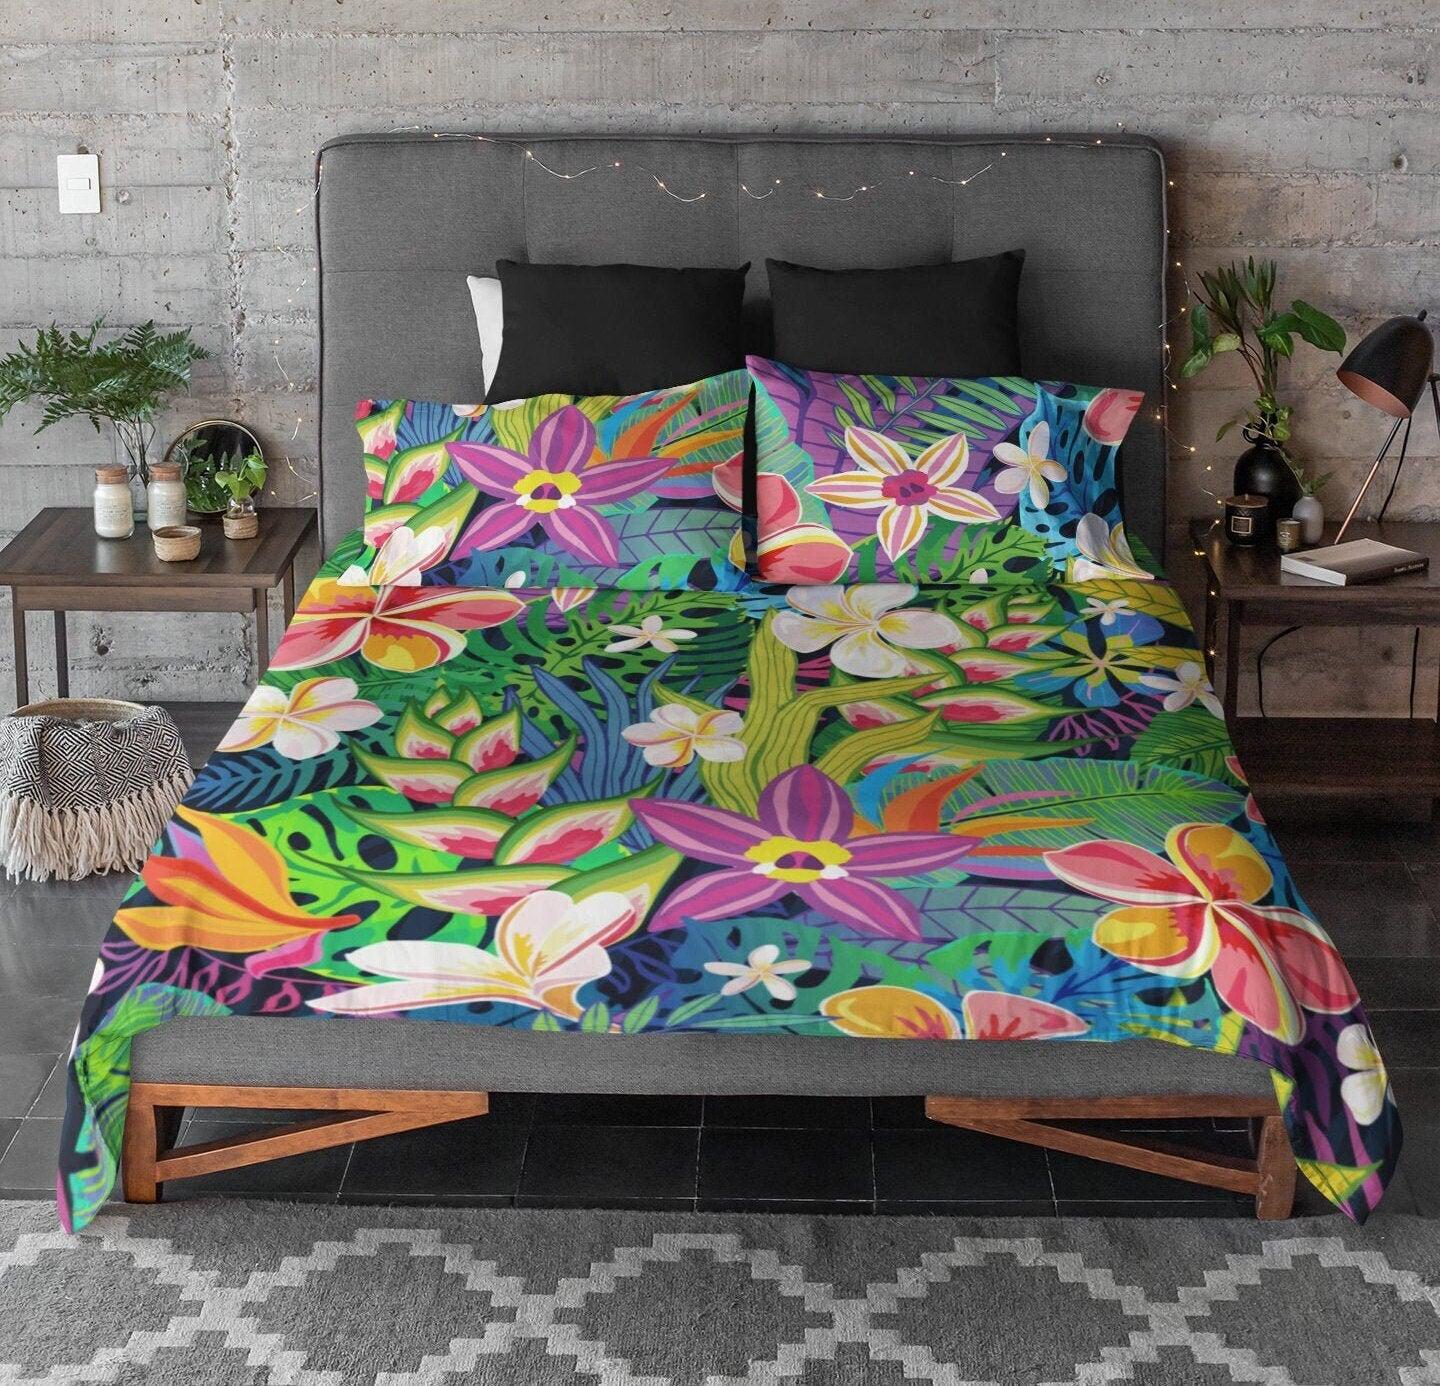 daintyduvet Tropical Design Duvet Cover Set | Colorful Comforter Cover with Flowers in Bright Colors | Cover for Weighted Blanket and Pillows